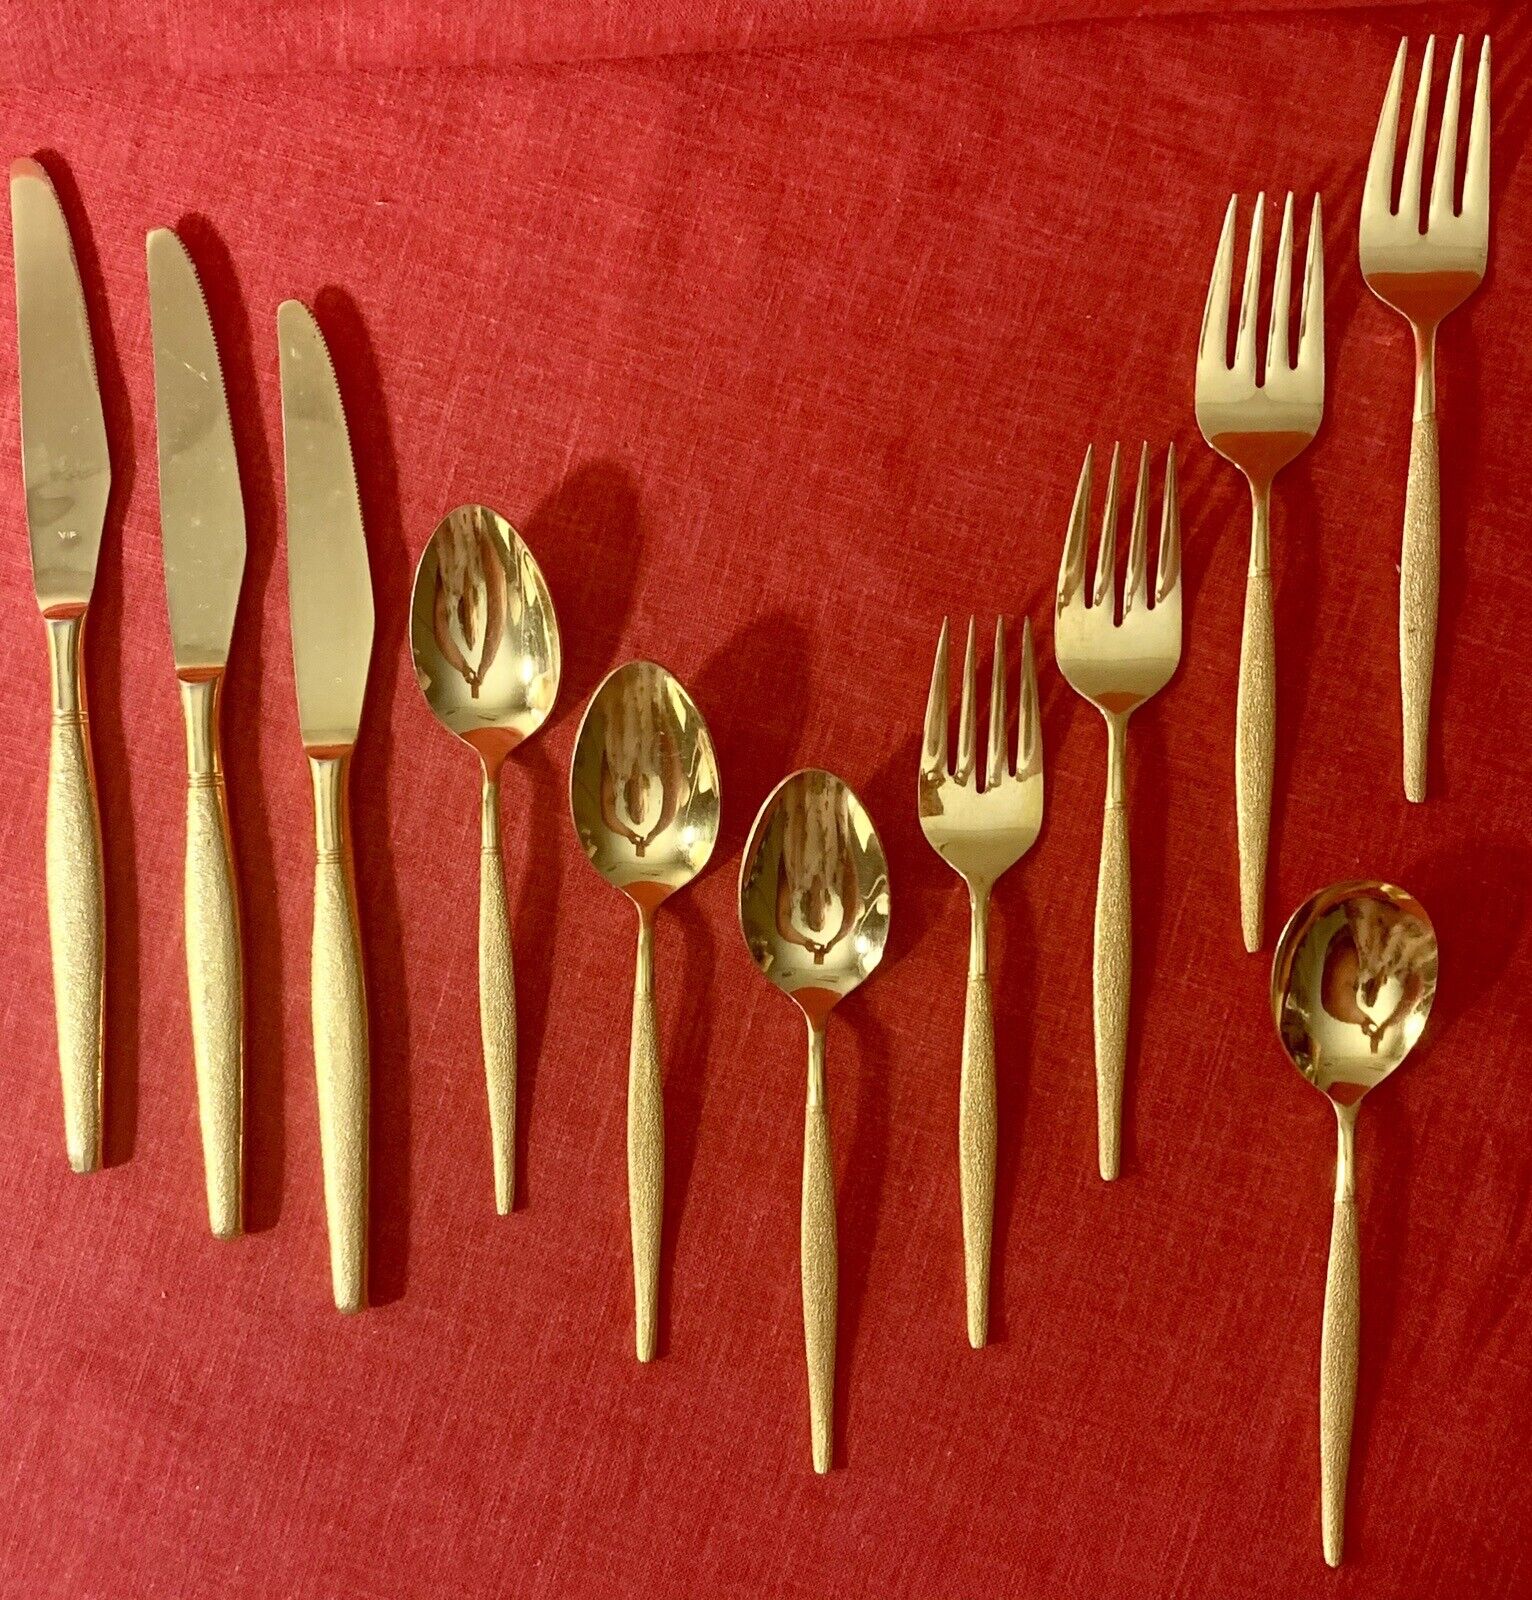 Vintage Stainless VIP Gold-Tone Flatware Mixed Lot of 11 Pieces